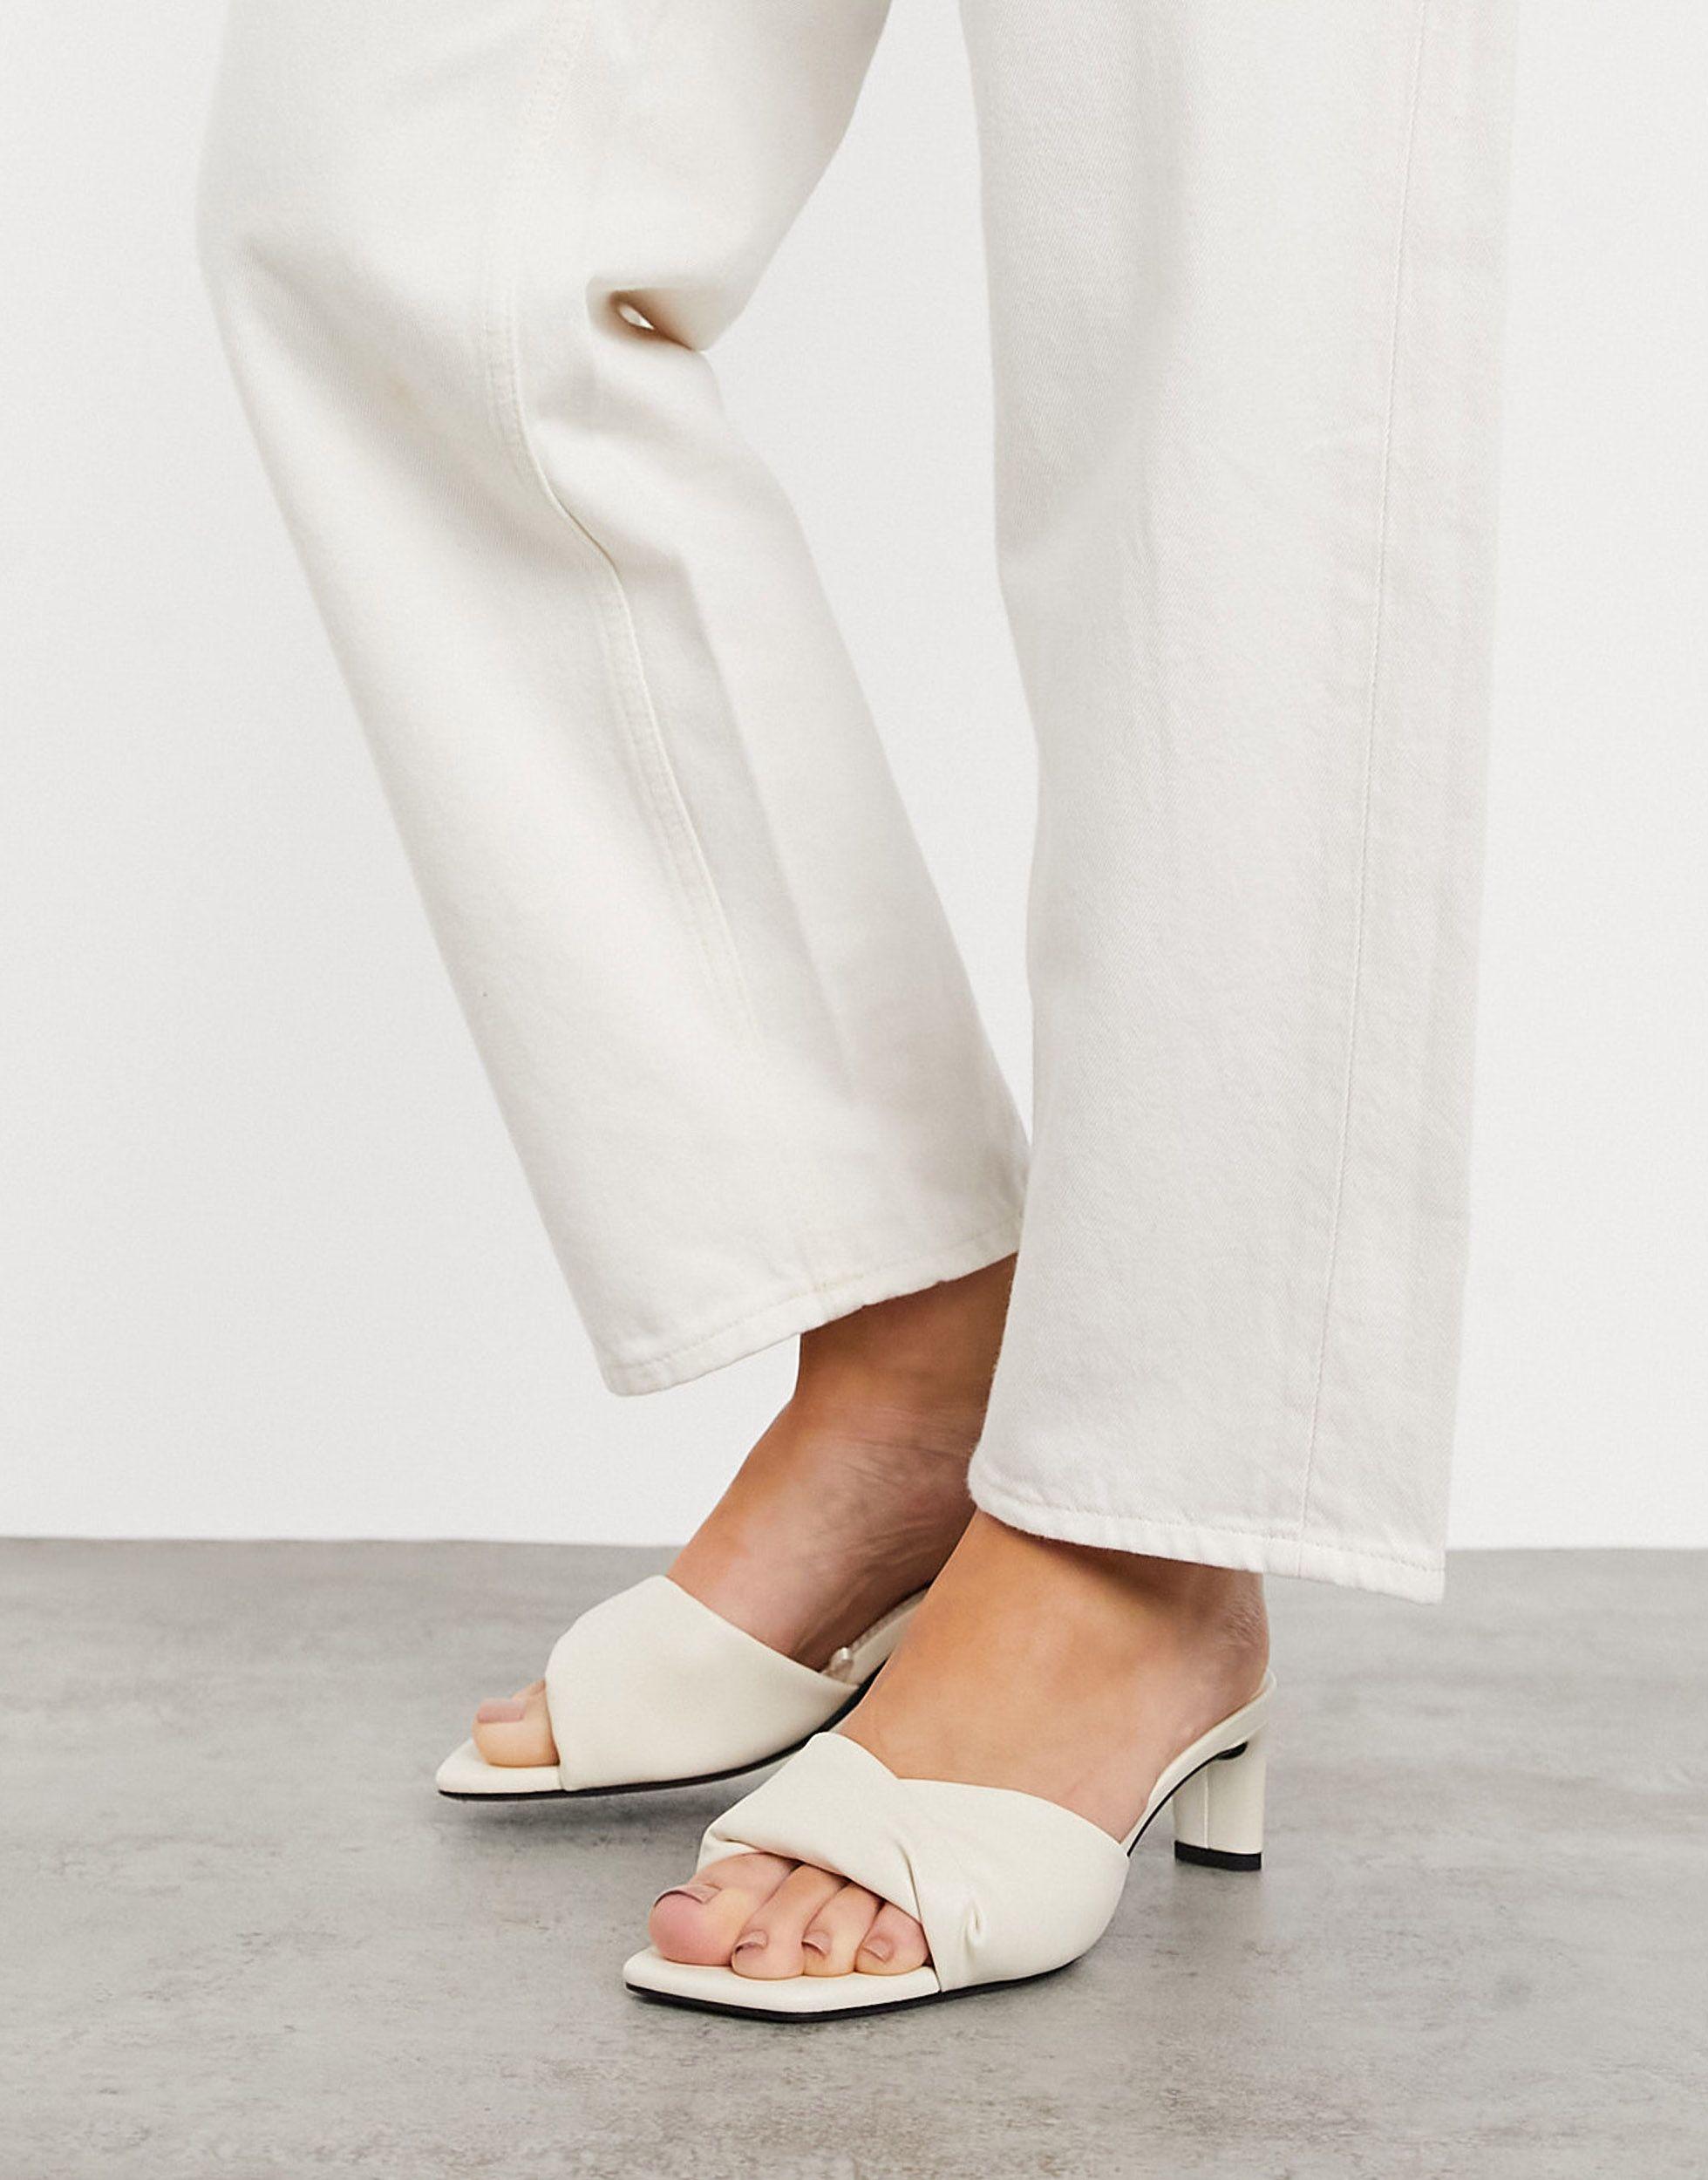 bershka mules for Sale,Up To OFF 63%